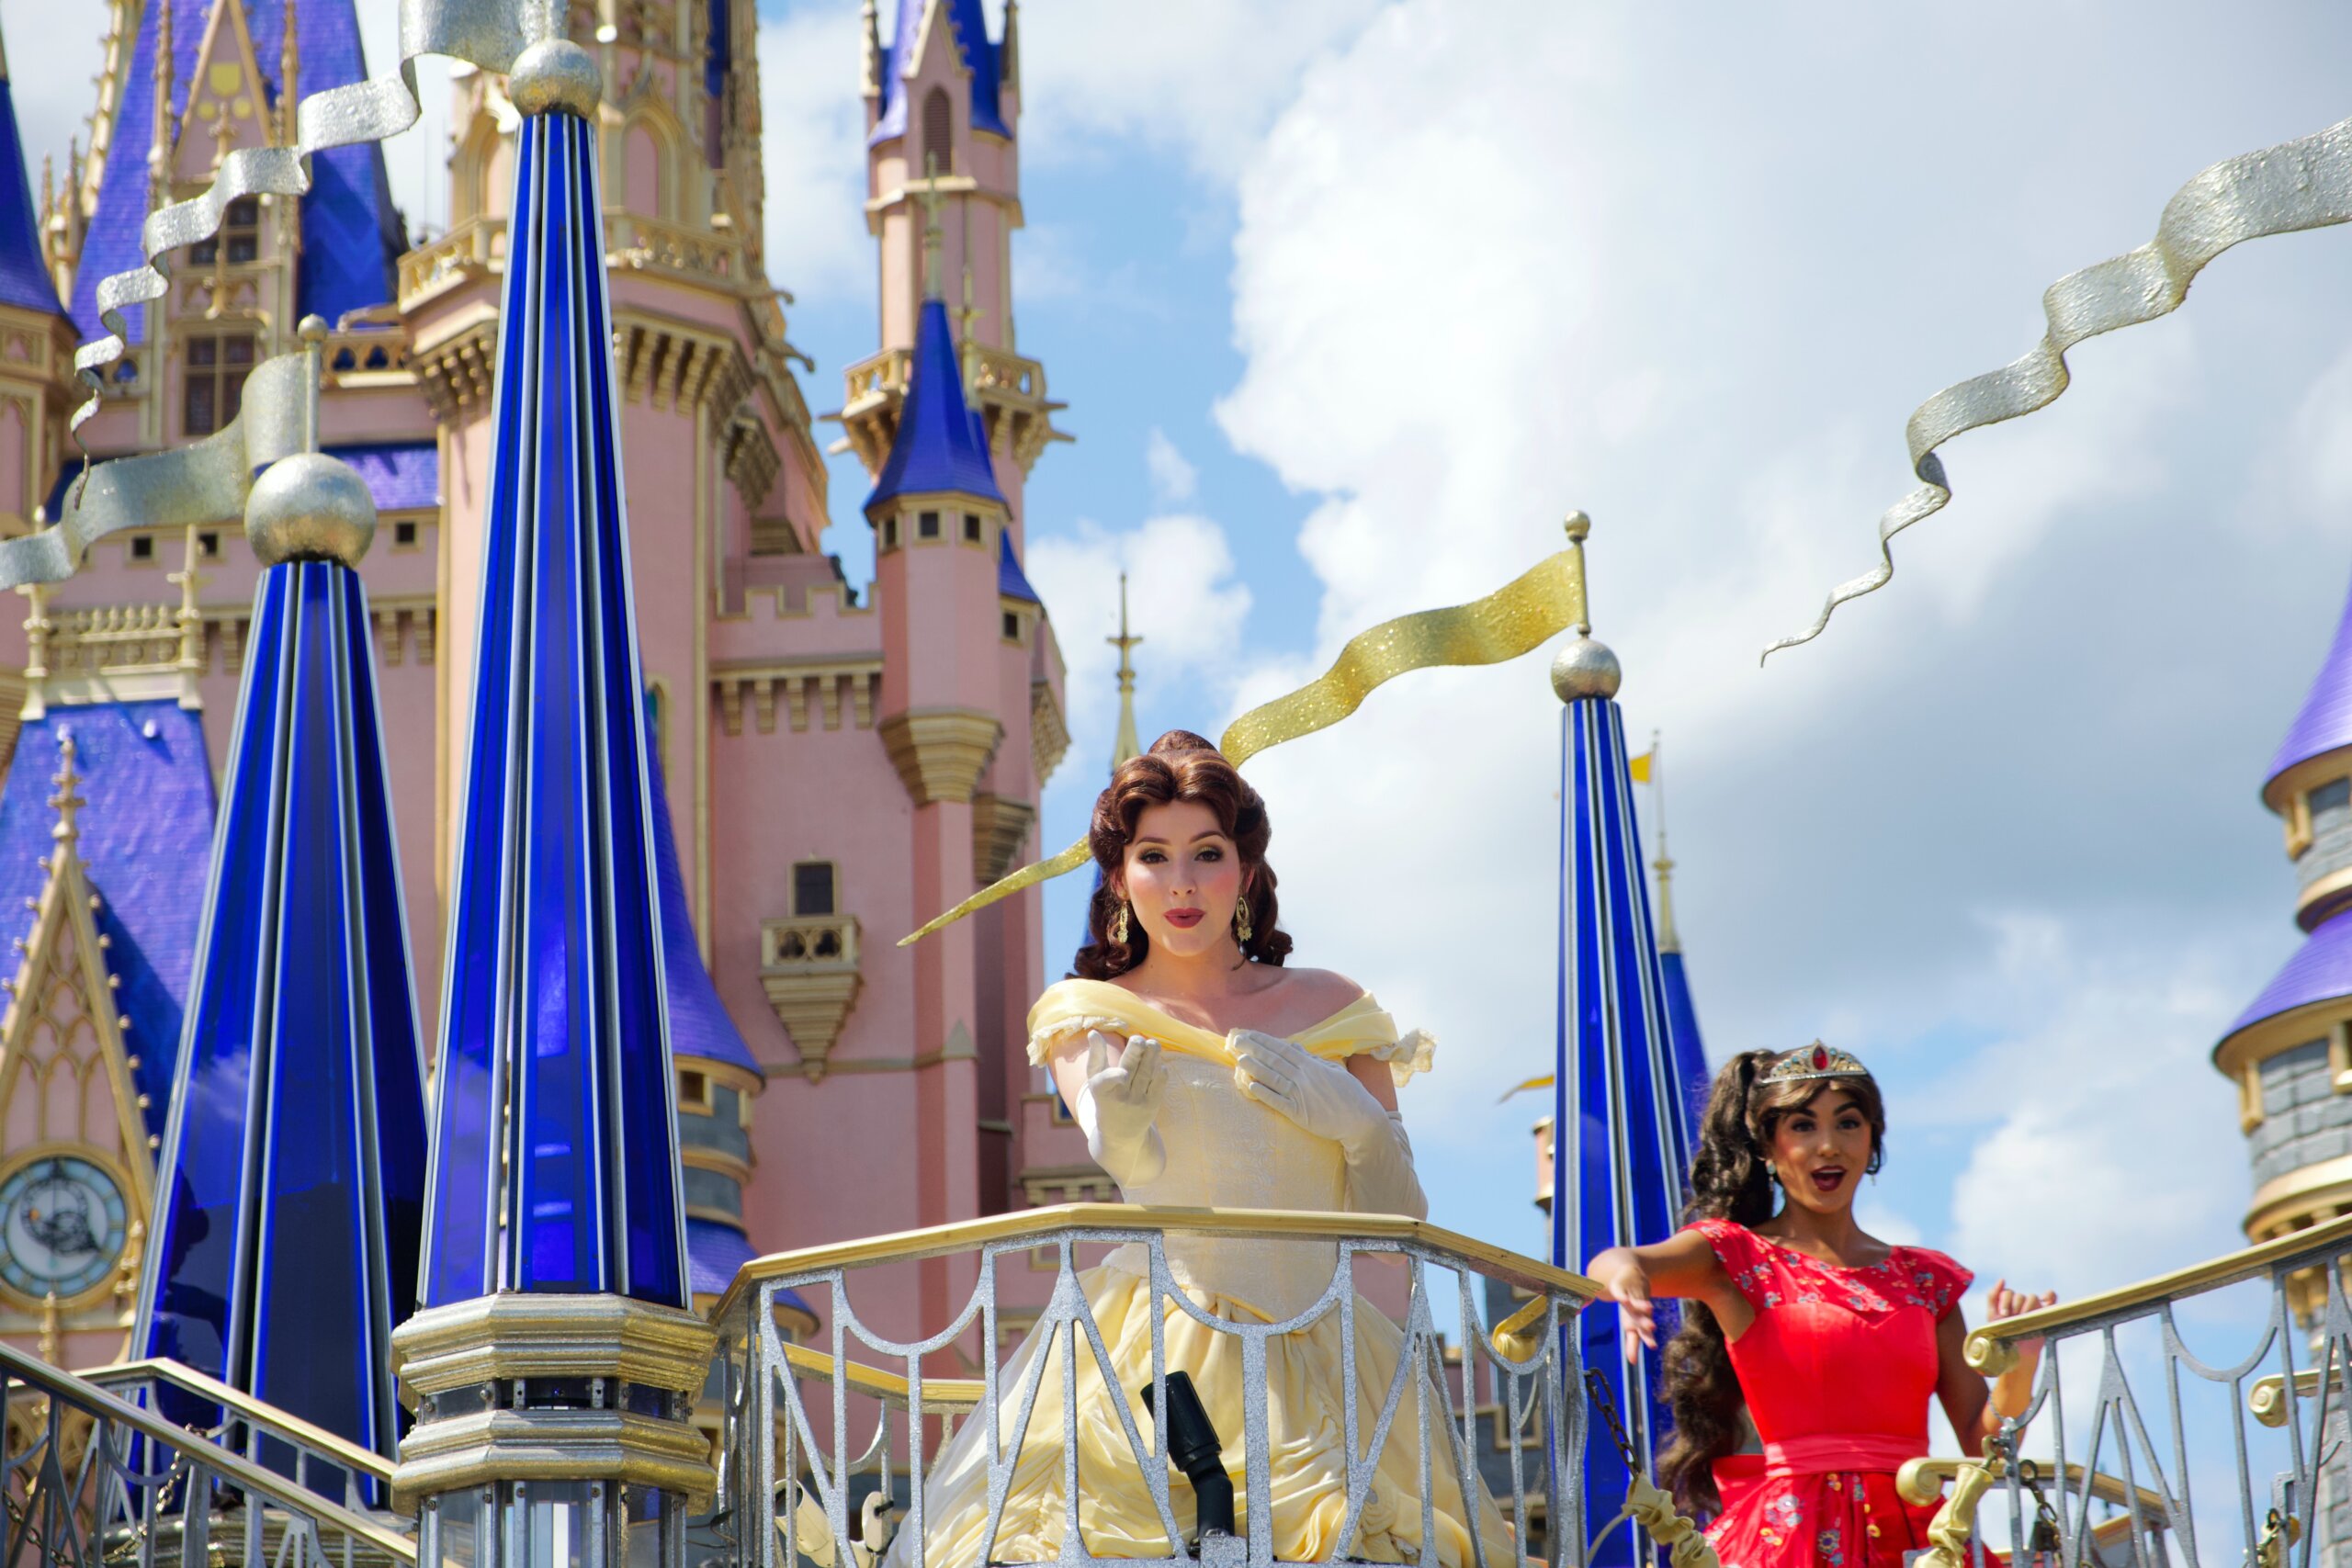 Princesses on float in front of castle